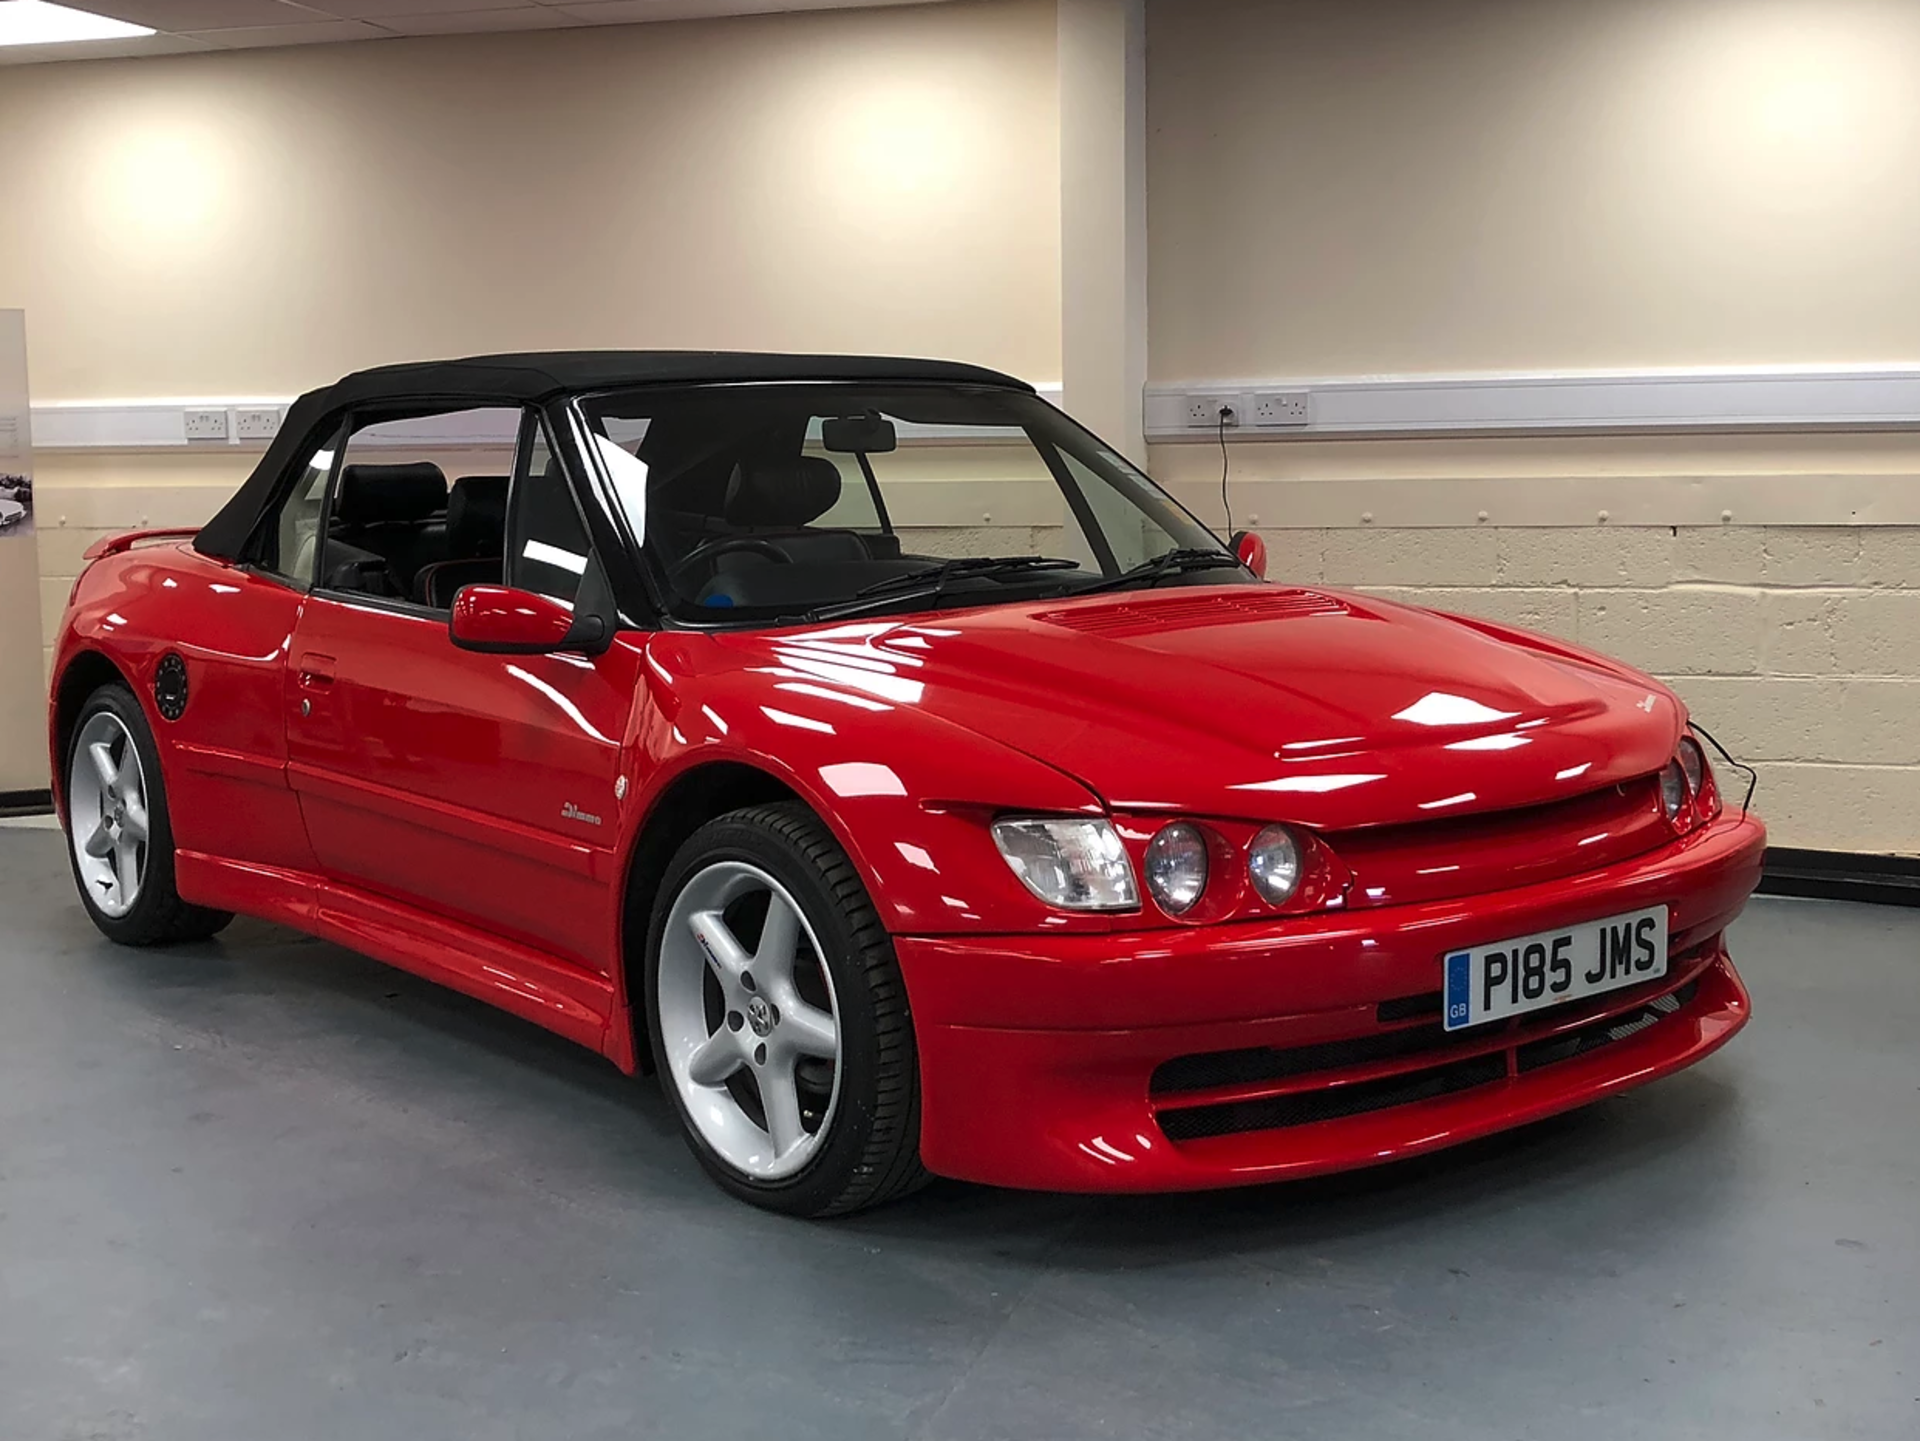 Peugeot 306 2.0i Cabriolet - Dimma prototype. Number 1 of only 2 ever built. - Image 2 of 13